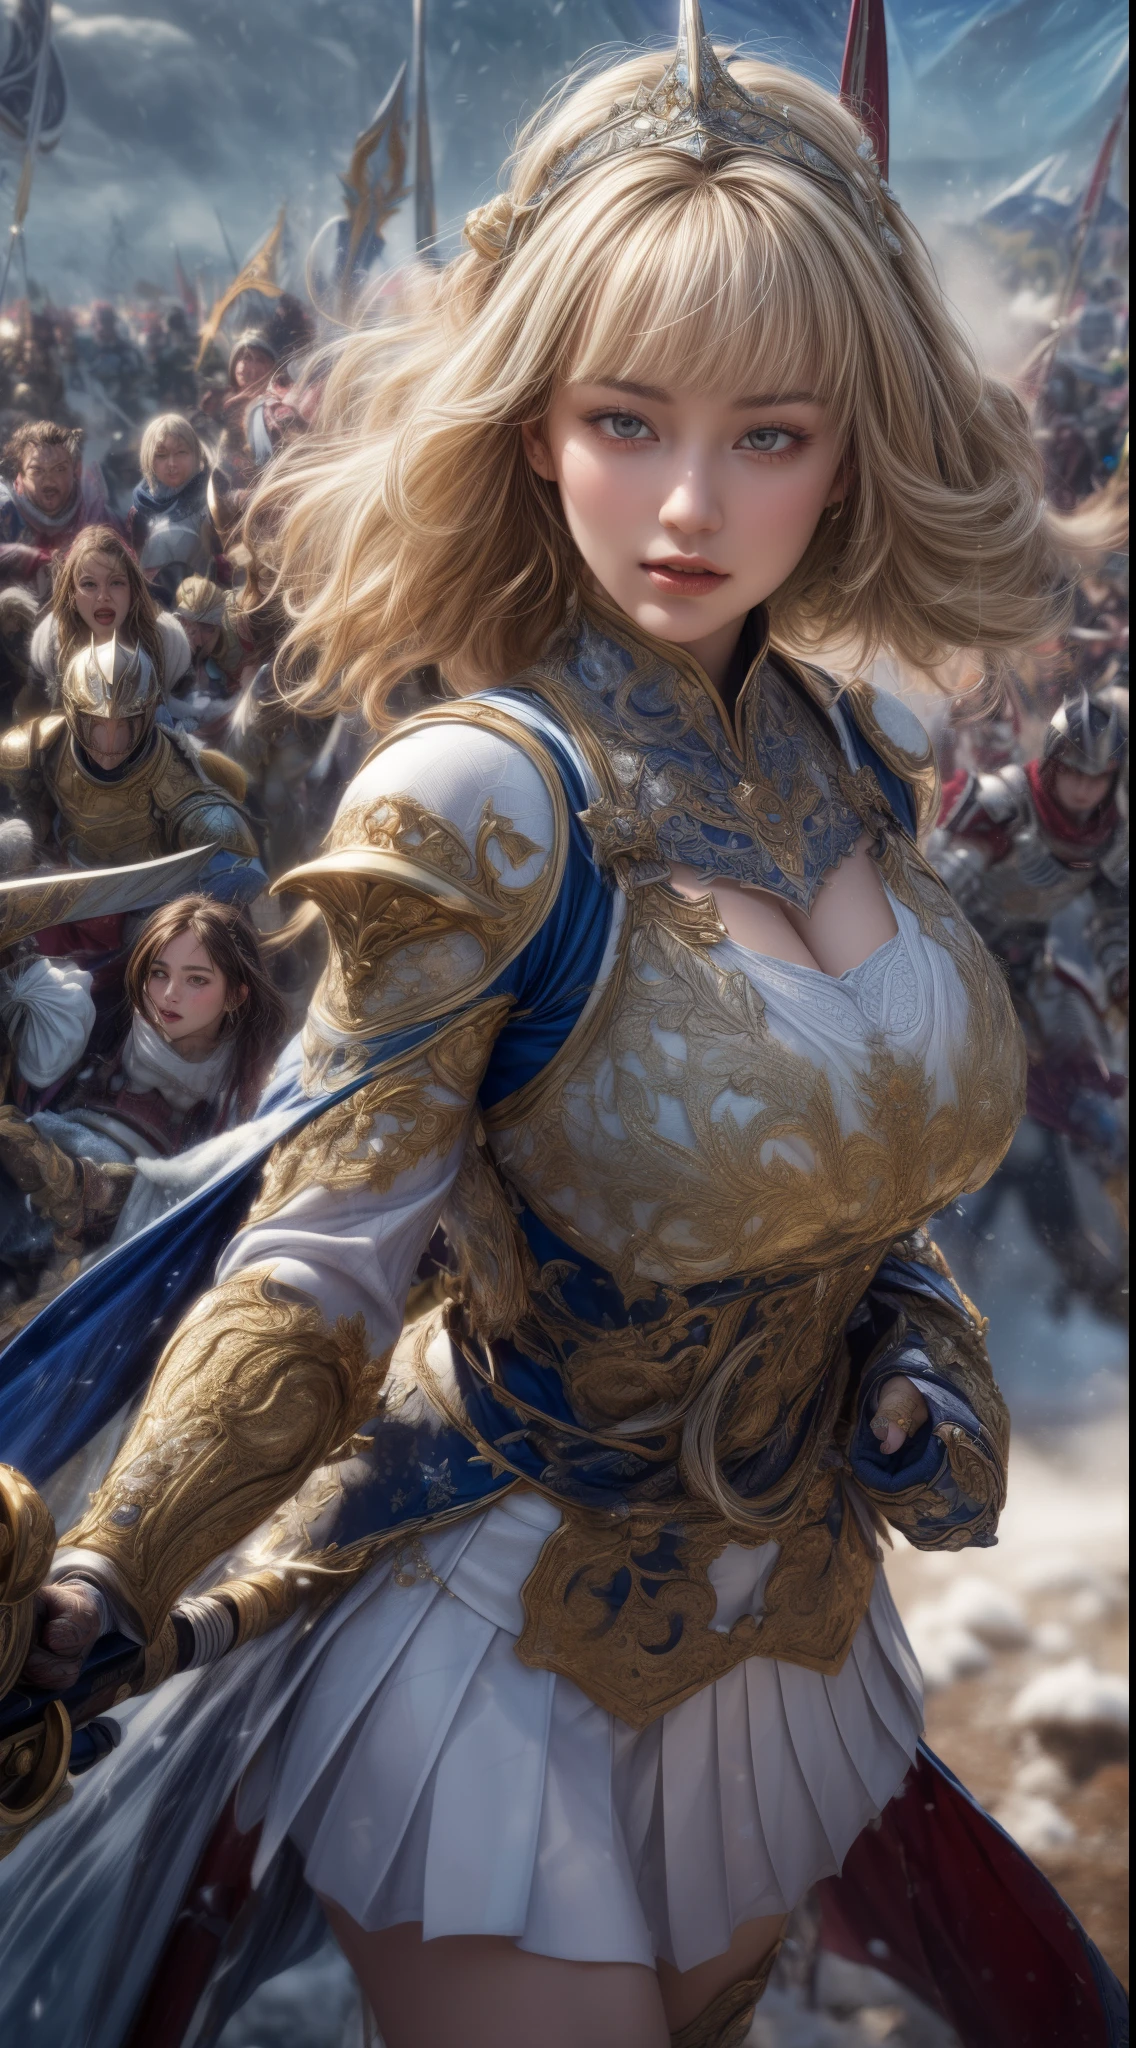 Very beautiful woman、Slender women、(Detailed face)、Realistic Skin、((holy knight)), ((Pearl White Armor))、((((Black armor with very fine and intricate decoration:1.1))))、((Delicate photo))，(Girl Astepeace RAW Photo Details:1.25), (highest quality:1.6), (超A high resolution:1.5), (Realistic:1.75), 8K resolution, Canon EOS R5, 50mm, Absurd, Ultra-detailed,Cinema Lighting,((battlefield))、((battle))、(((White skirt with embellishments)))、Thigh-high socks、Shin Guards、((Blonde))、((Curly Hair))、((Drill Hair))、((Wavy short hair with bangs,))、Get six-pack、Cape、Beautiful Armor、(((Has a huge weapon)))、(In combat)、The wind is blowing、((Symmetrical Armor))、((((Blizzard))))、(((Leading a large group of knights:1.2)))、Banner、Armor inspired by the ice goddess